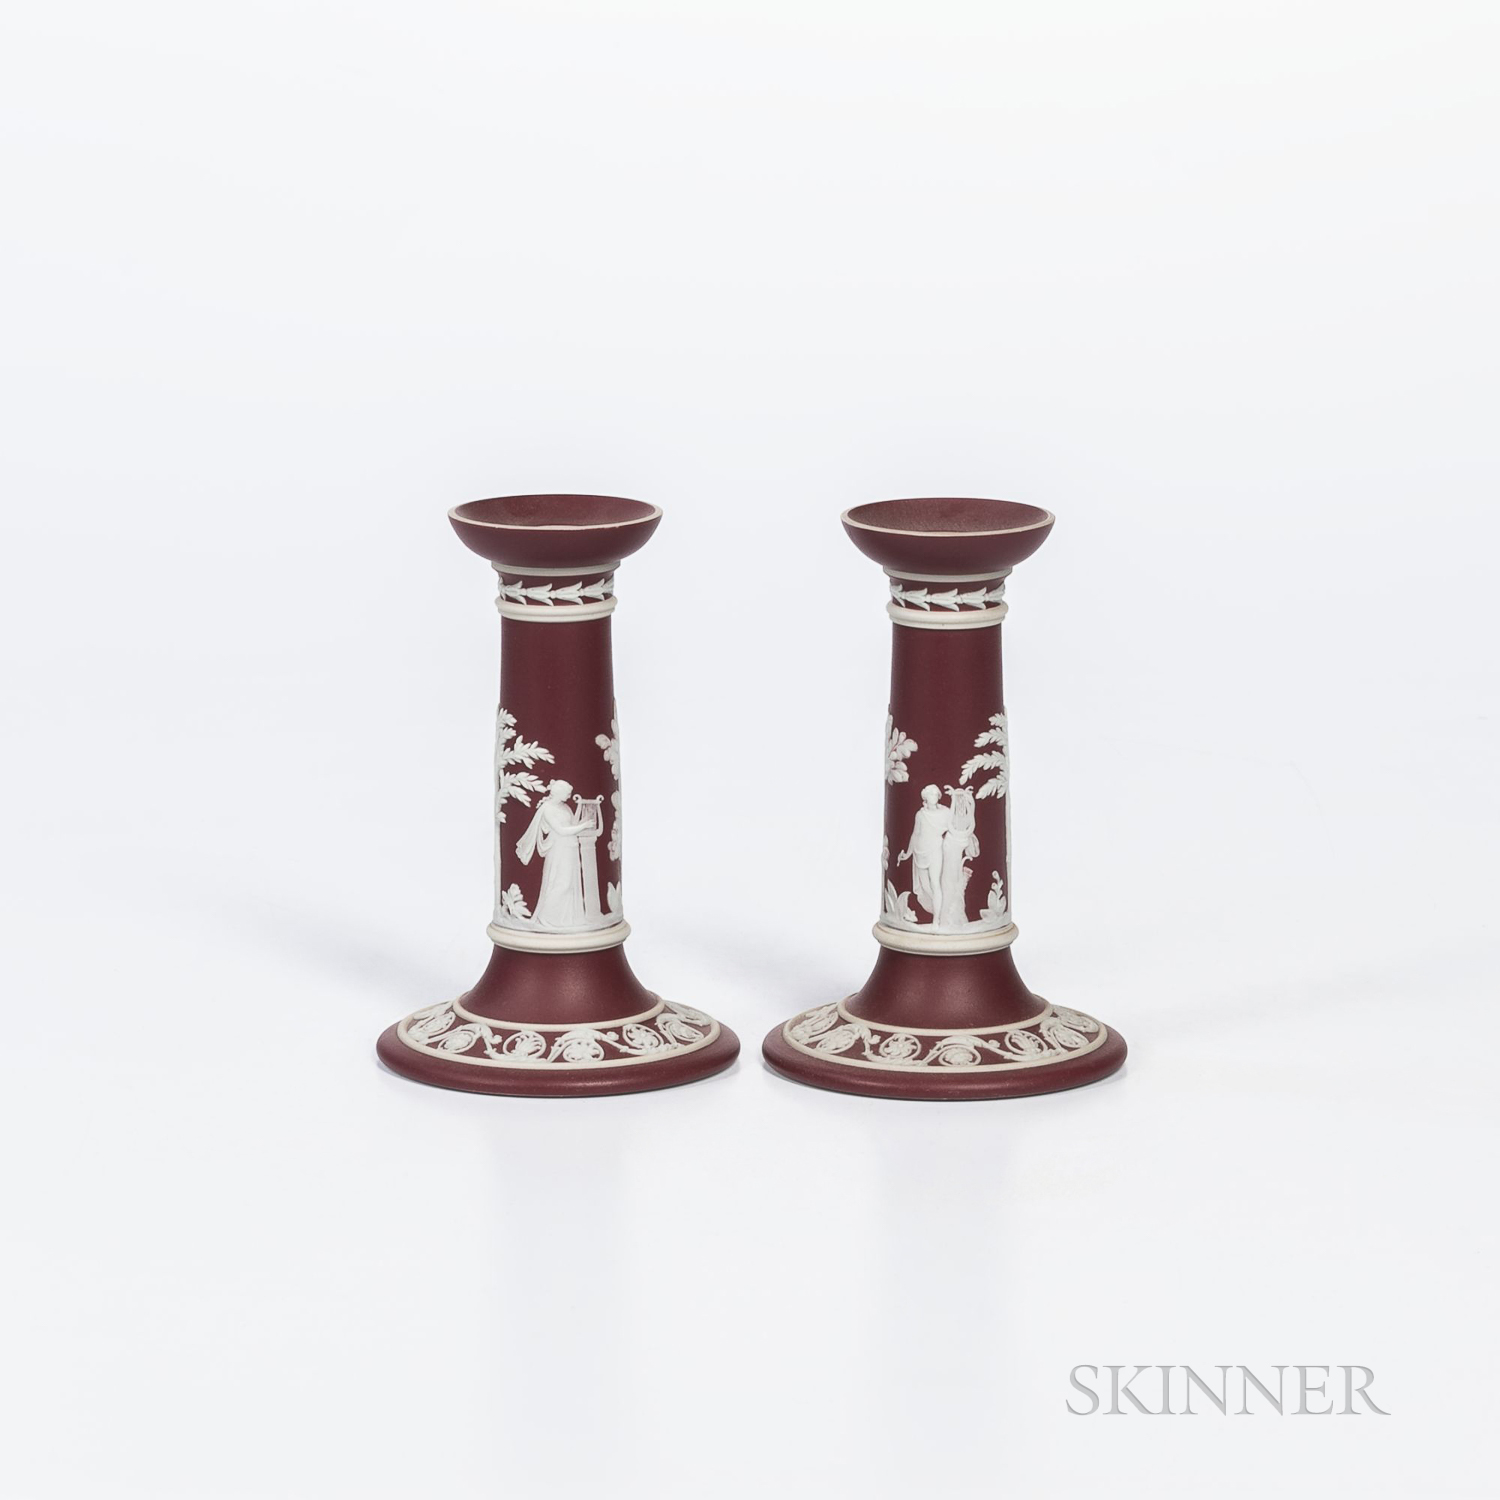 Pair of Wedgwood Crimson Jasper Dip Candlesticks, England, early 20th century, applied white classic